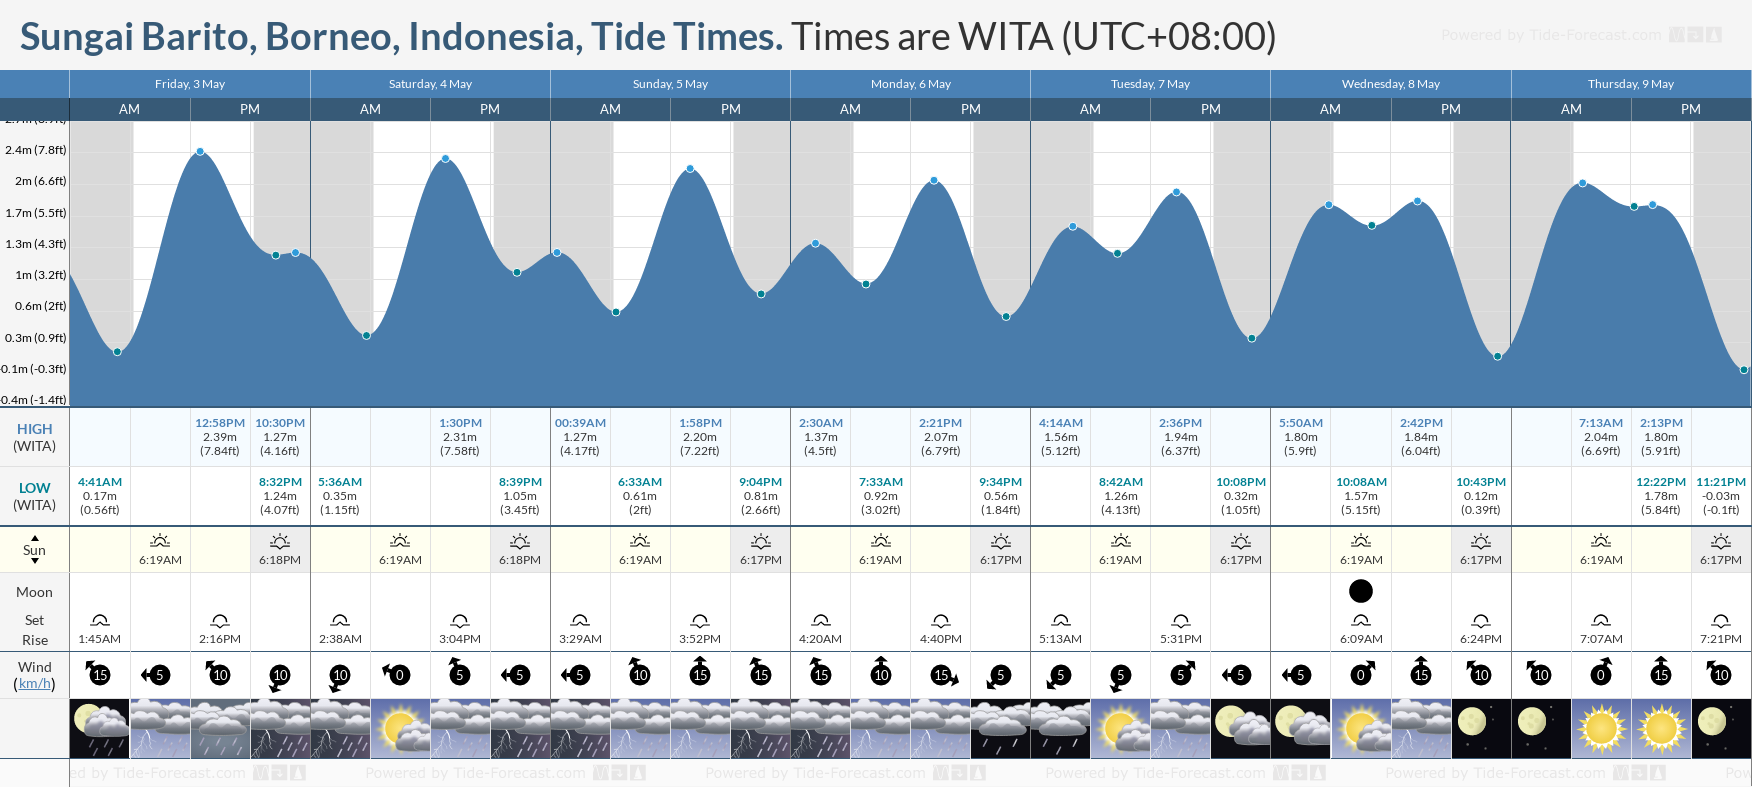 Sungai Barito, Borneo, Indonesia Tide Chart including high and low tide times for the next 7 days